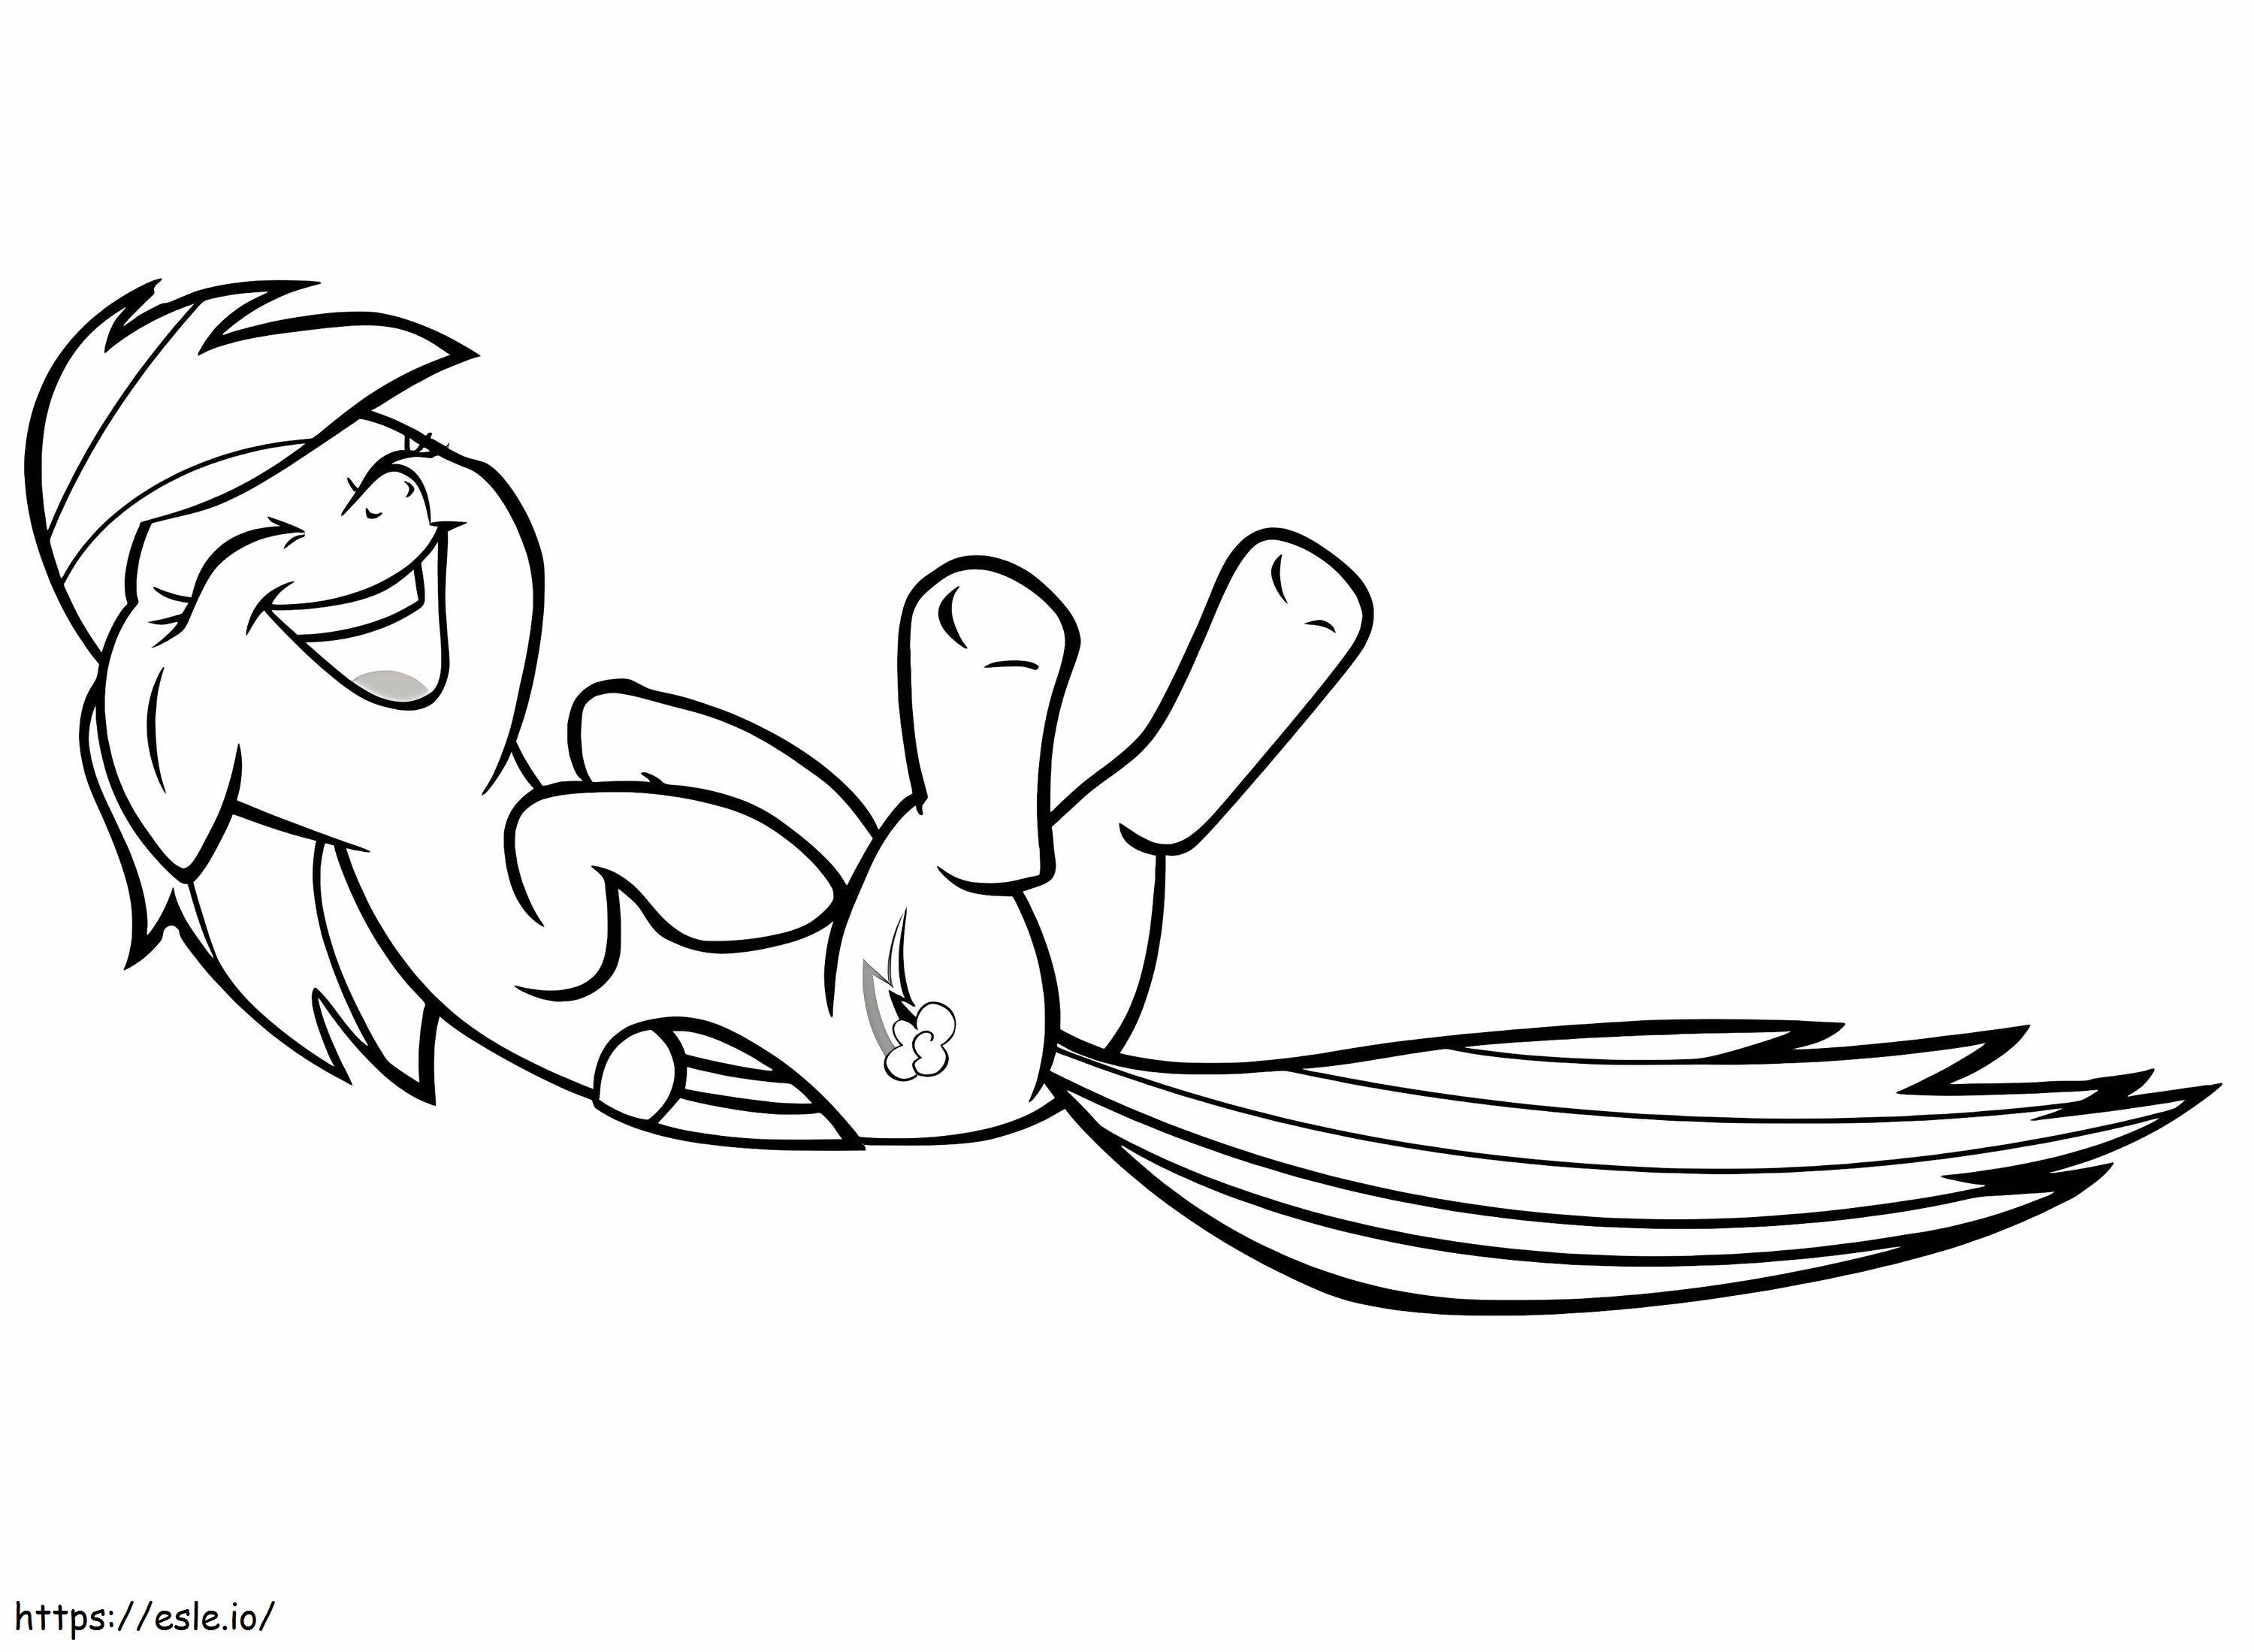 Rainbow Dash Laughing coloring page